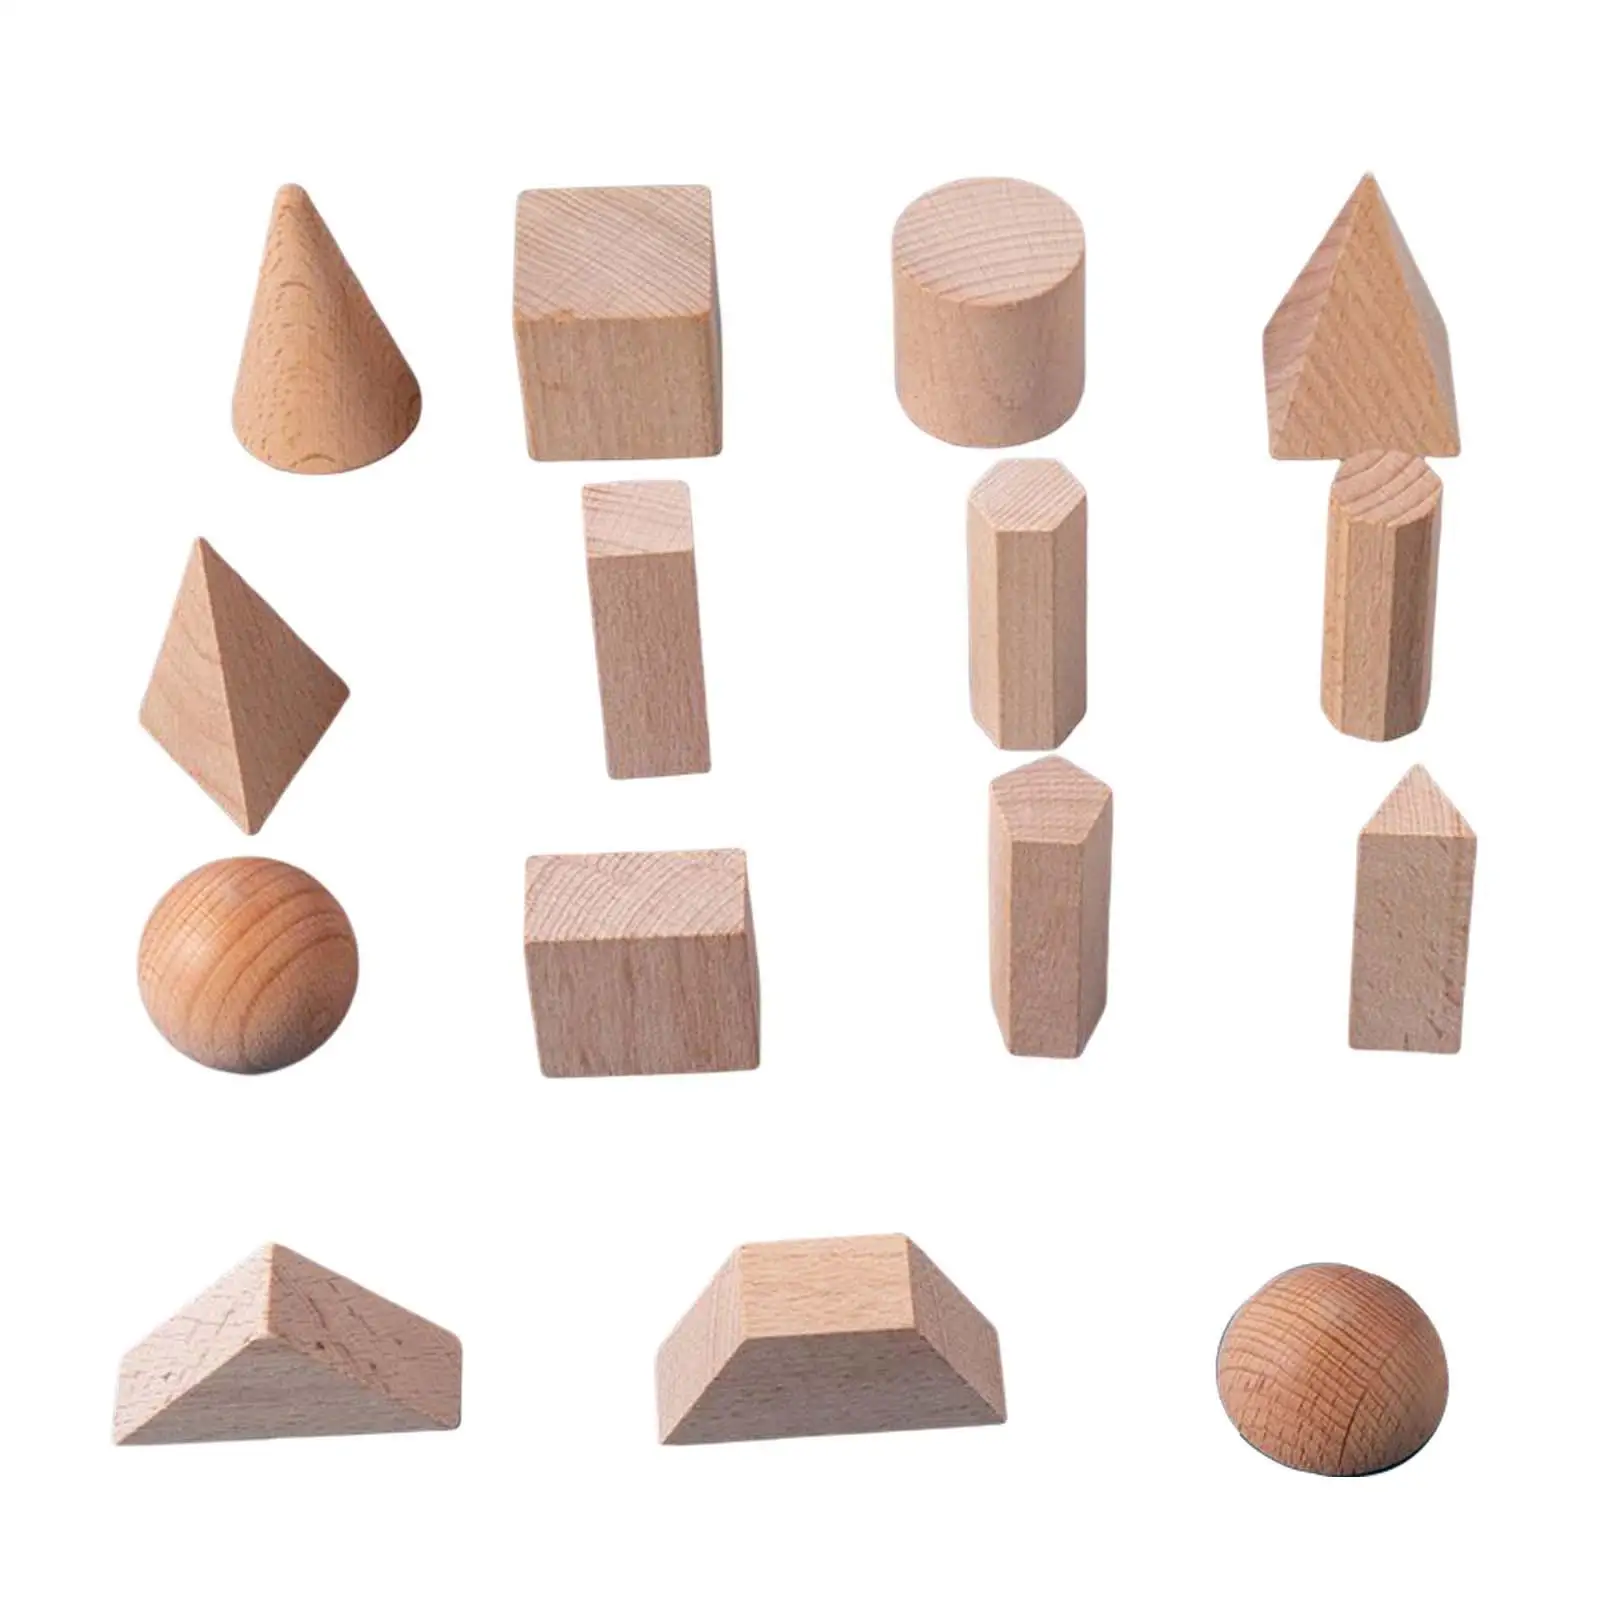 15x Wood Geometric Solids 3D Shapes Learning Education Math Toys Stacking Toy for Kids Toddler Babies Ages 2+